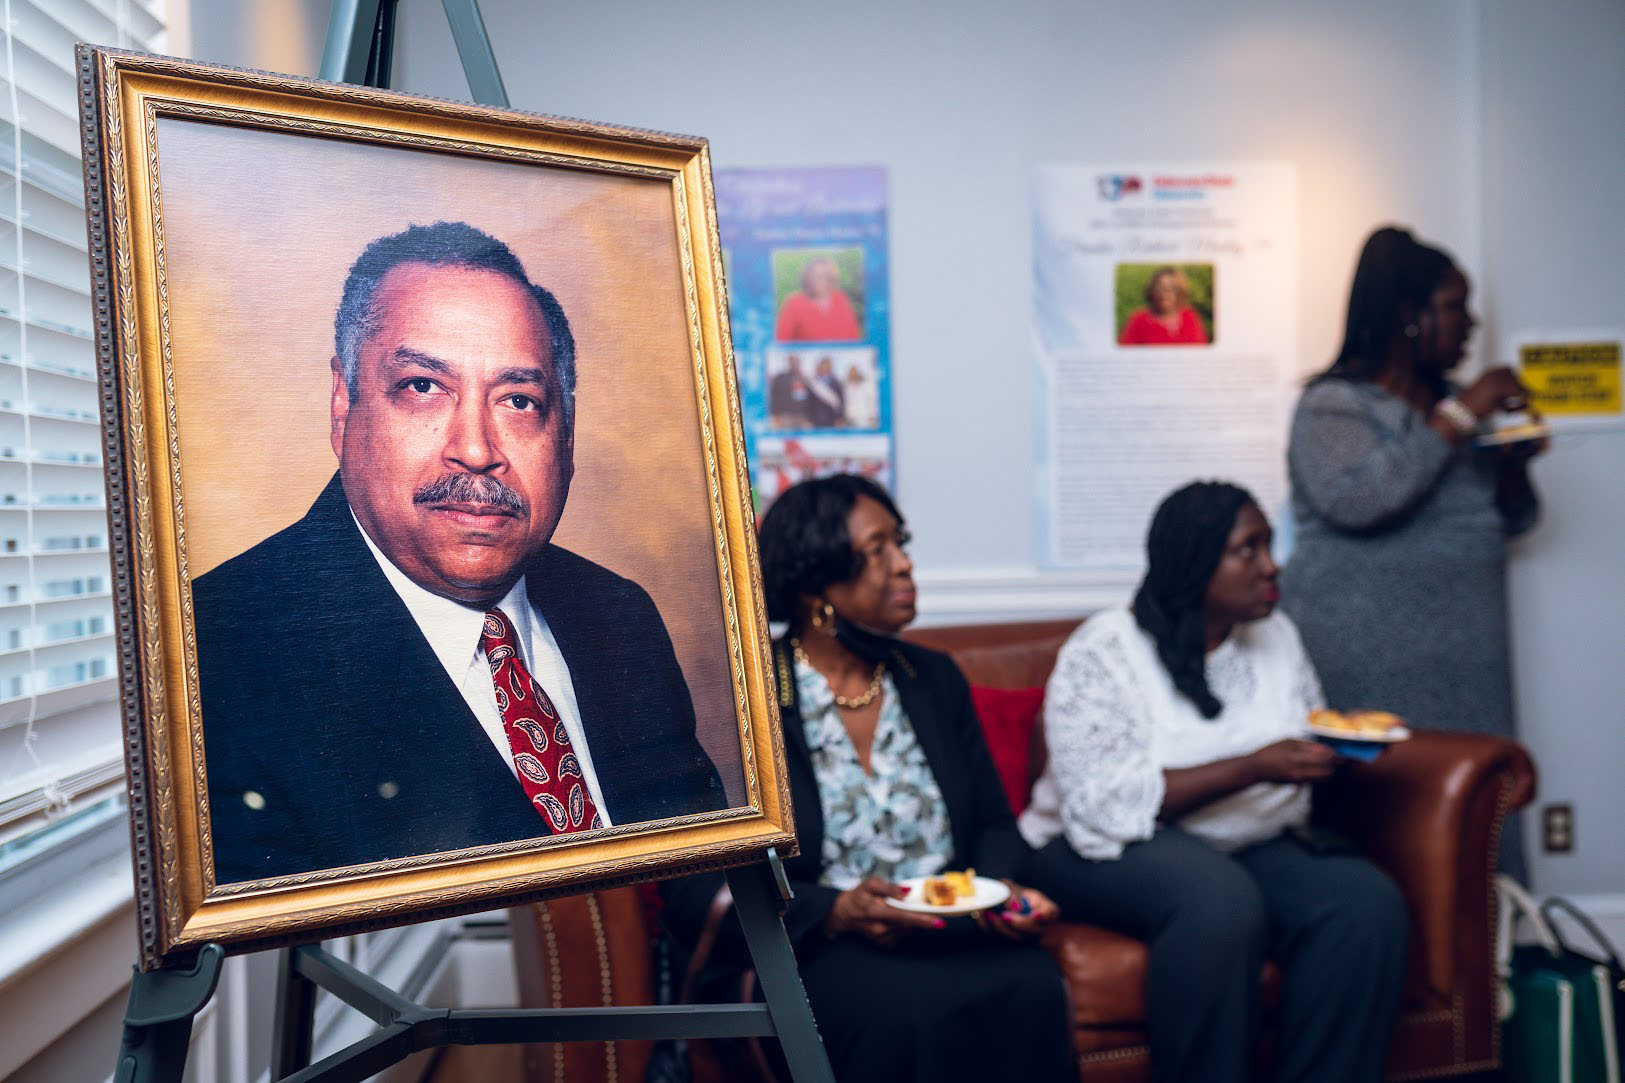 A portrait of Dr. William B. DeLauder was displayed during the reception